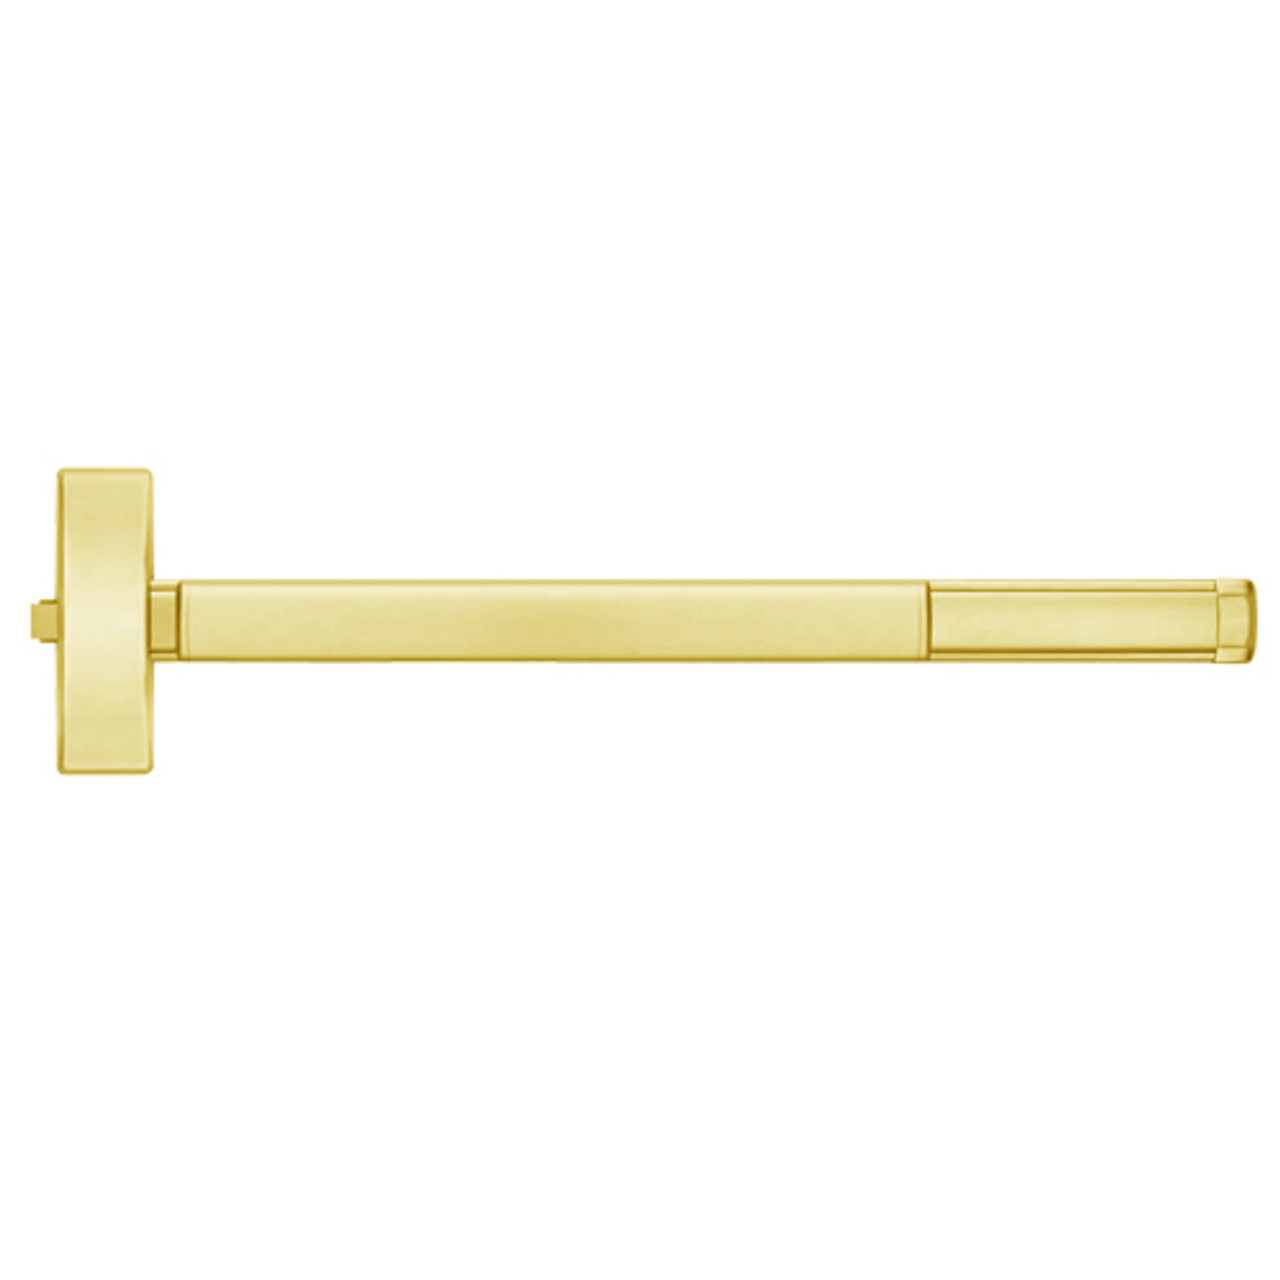 TS2114-605-48 PHI 2100 Series Non Fire Rated Apex Rim Exit Device with Touchbar Monitoring Switch Prepped for Lever-Knob Always Active in Bright Brass Finish